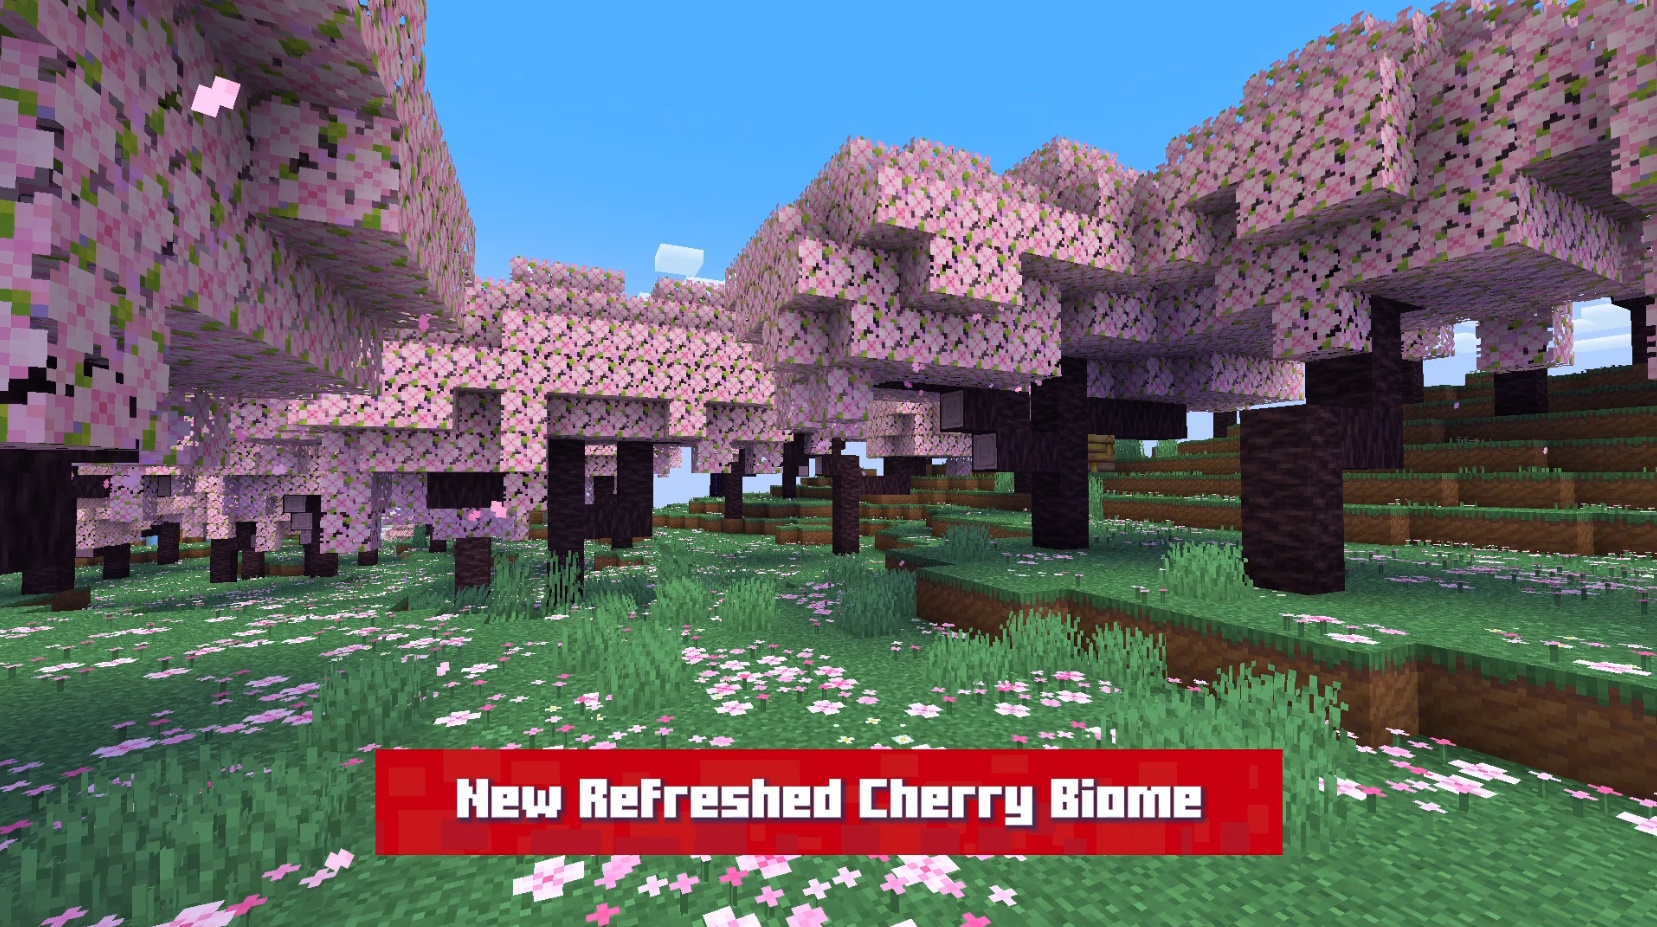 New Refreshed Cherry Biome